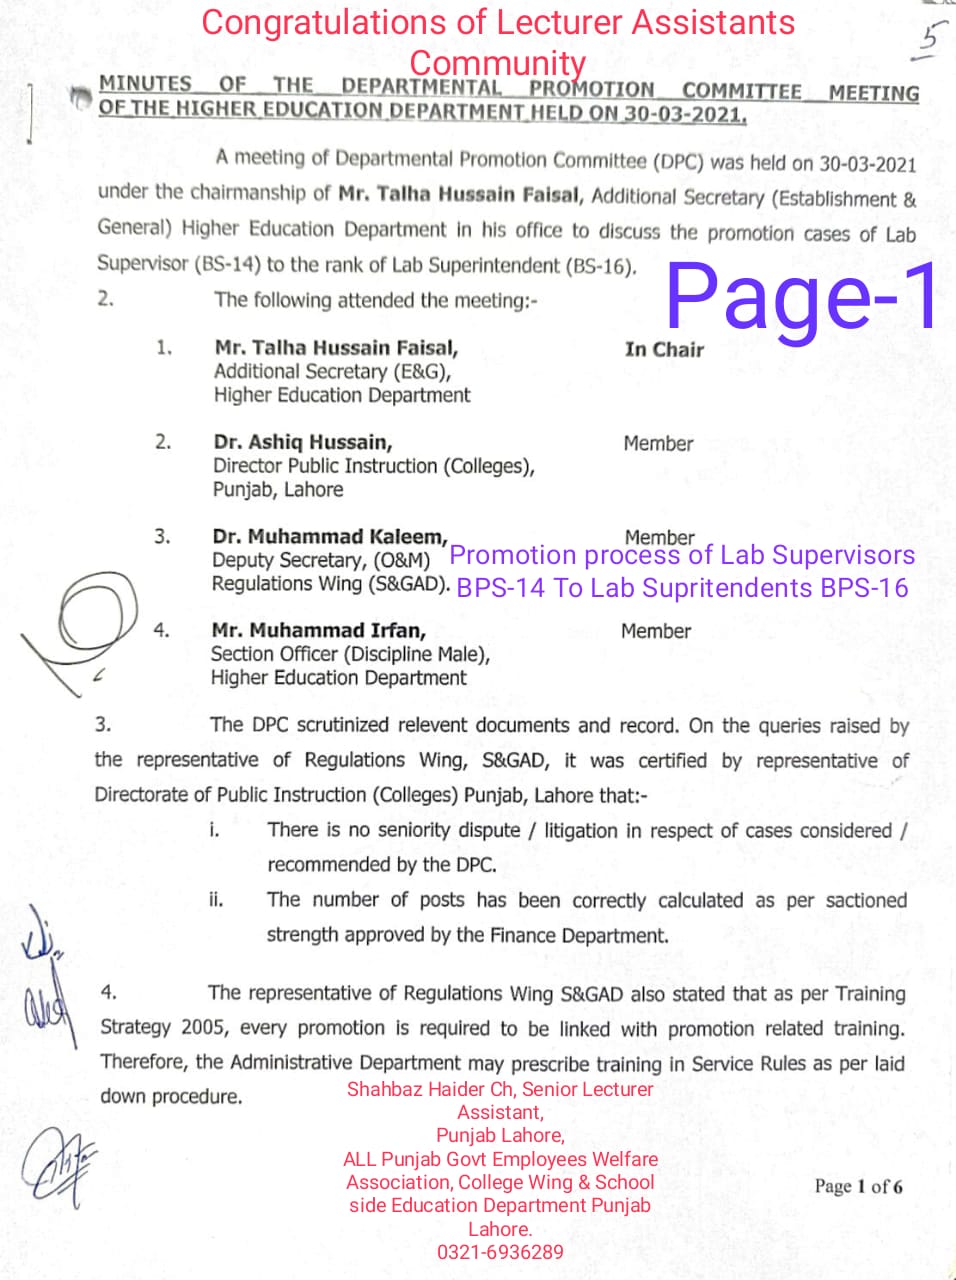 Promotion of Lab Supervisors to Lab Superintendents (BPS-16)